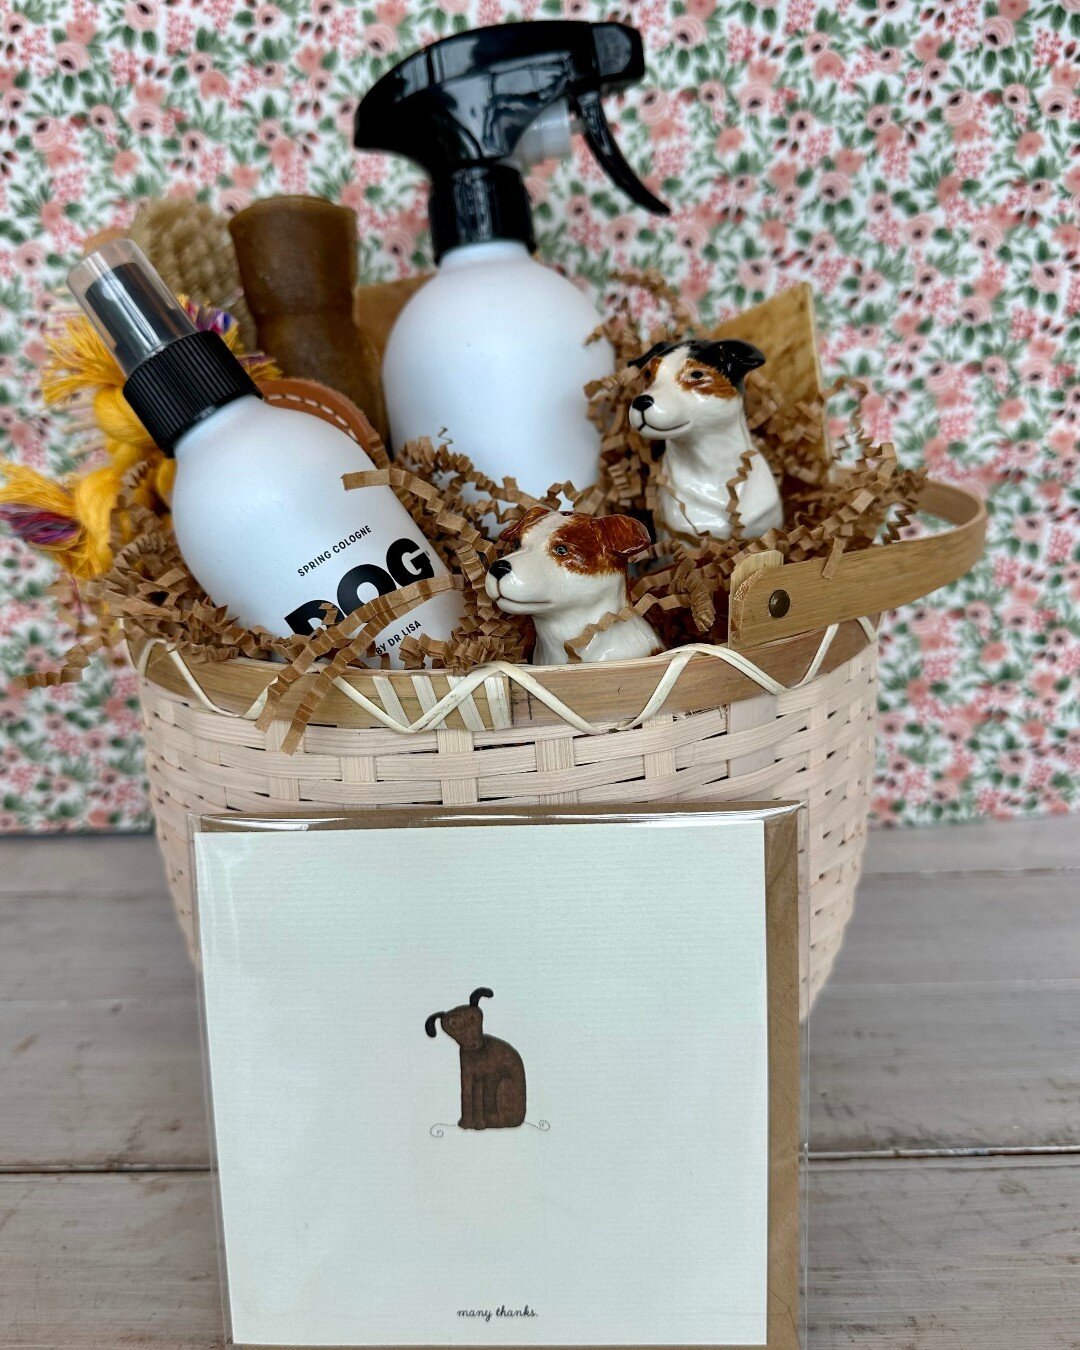 Mother's Day is right around the corner! Treat your mom to something you know she'll love. Shop our &quot;Dog Mom&quot; basket at Star Provisions. 🐕💖